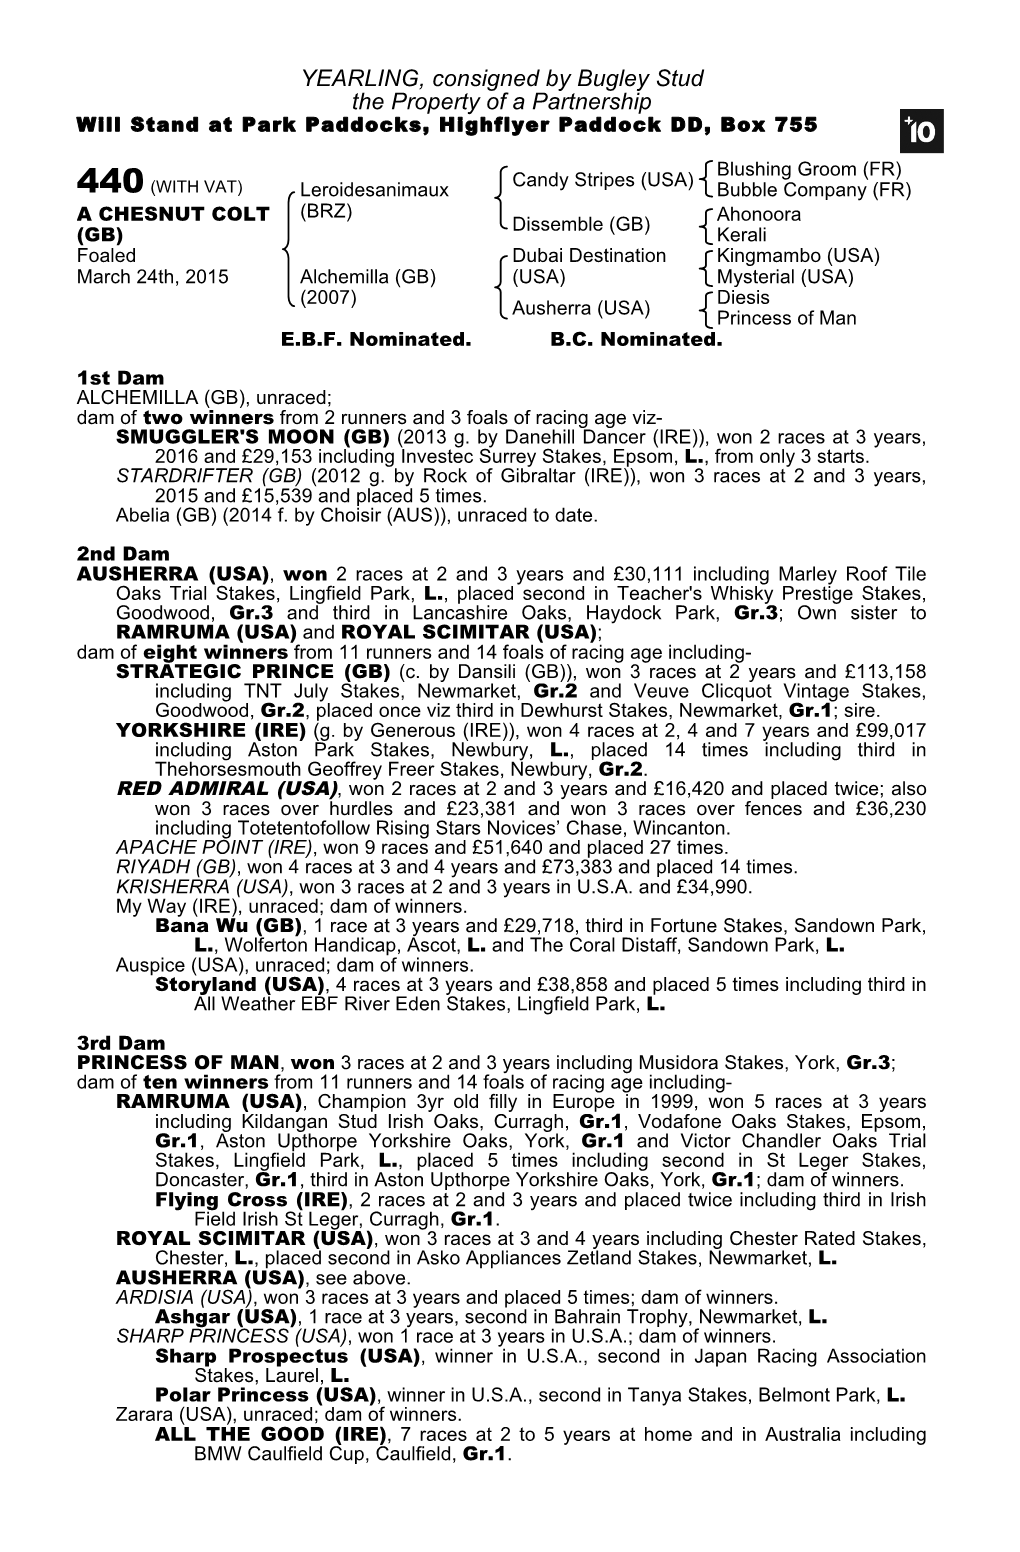 YEARLING, Consigned by Bugley Stud the Property of a Partnership Will Stand at Park Paddocks, Highflyer Paddock DD, Box 755